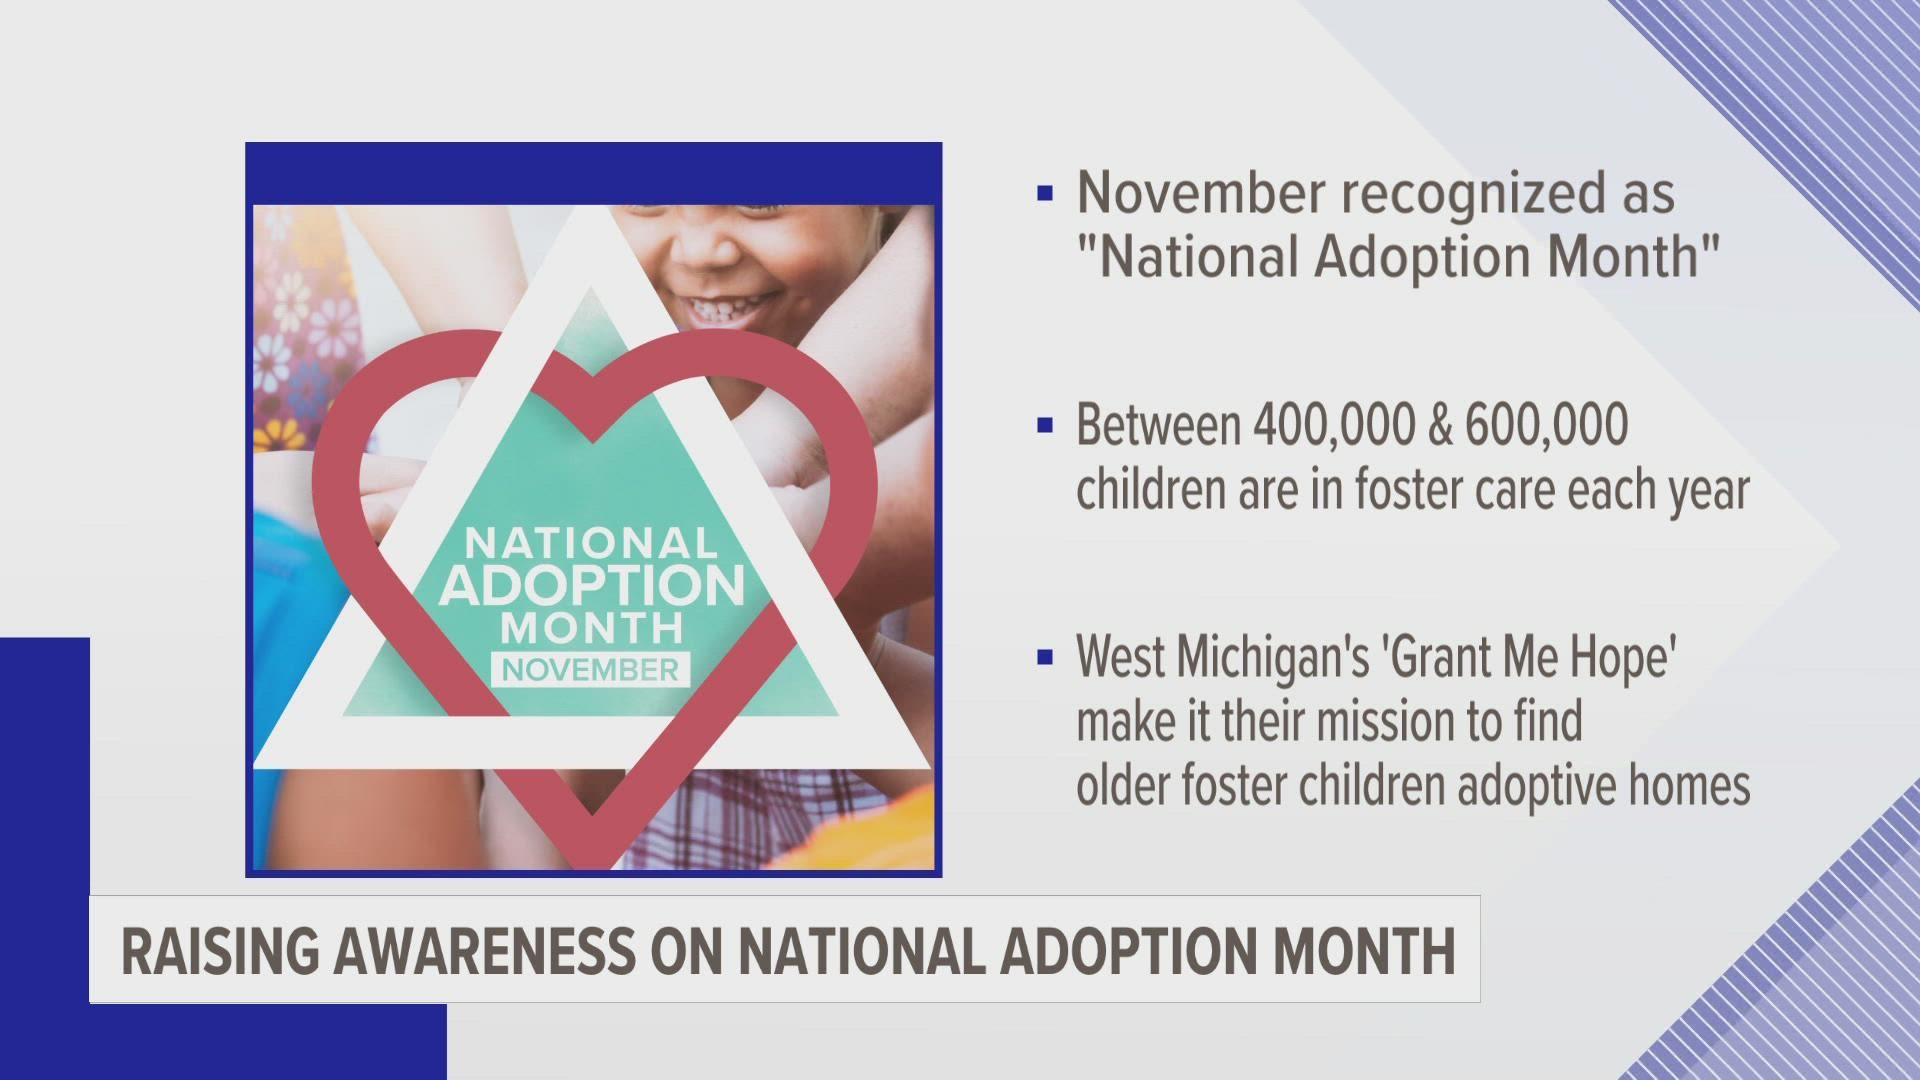 Around 300,000 children in the foster care system are deemed 'unadoptable' because they are too old, want to be adopted with their siblings or have medical needs.